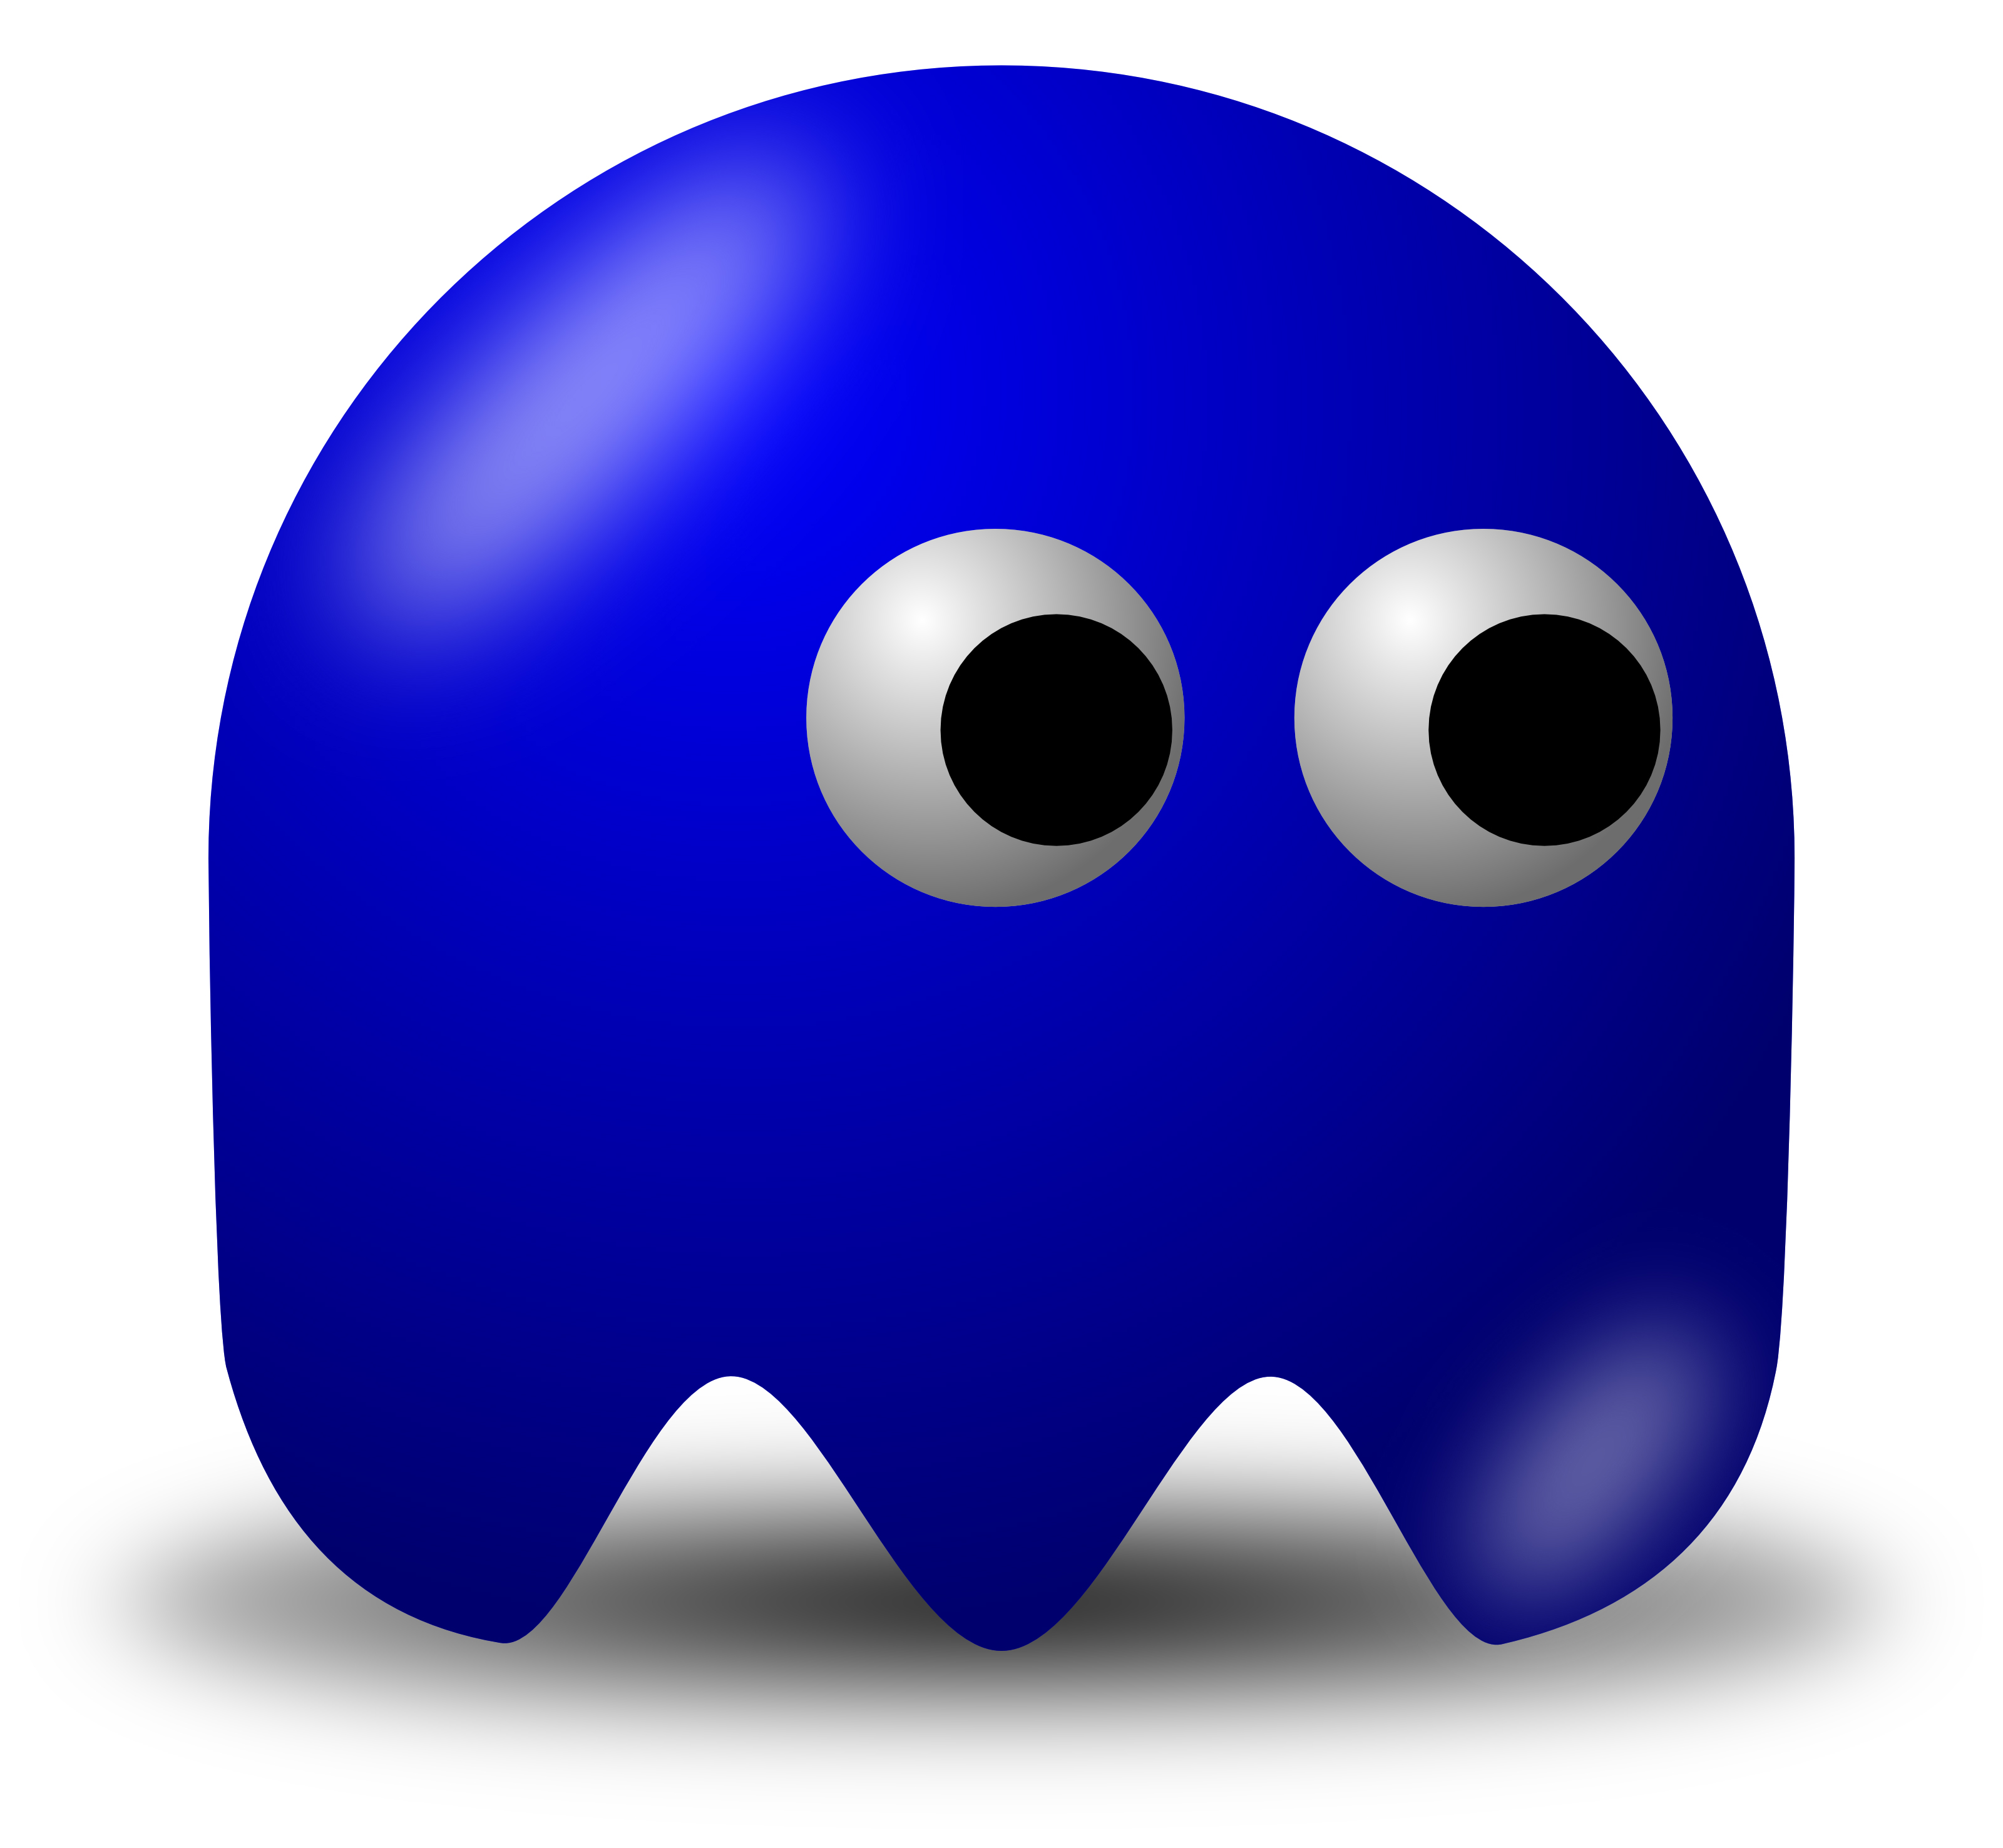 Clipart of computer cartoon characters in blue 